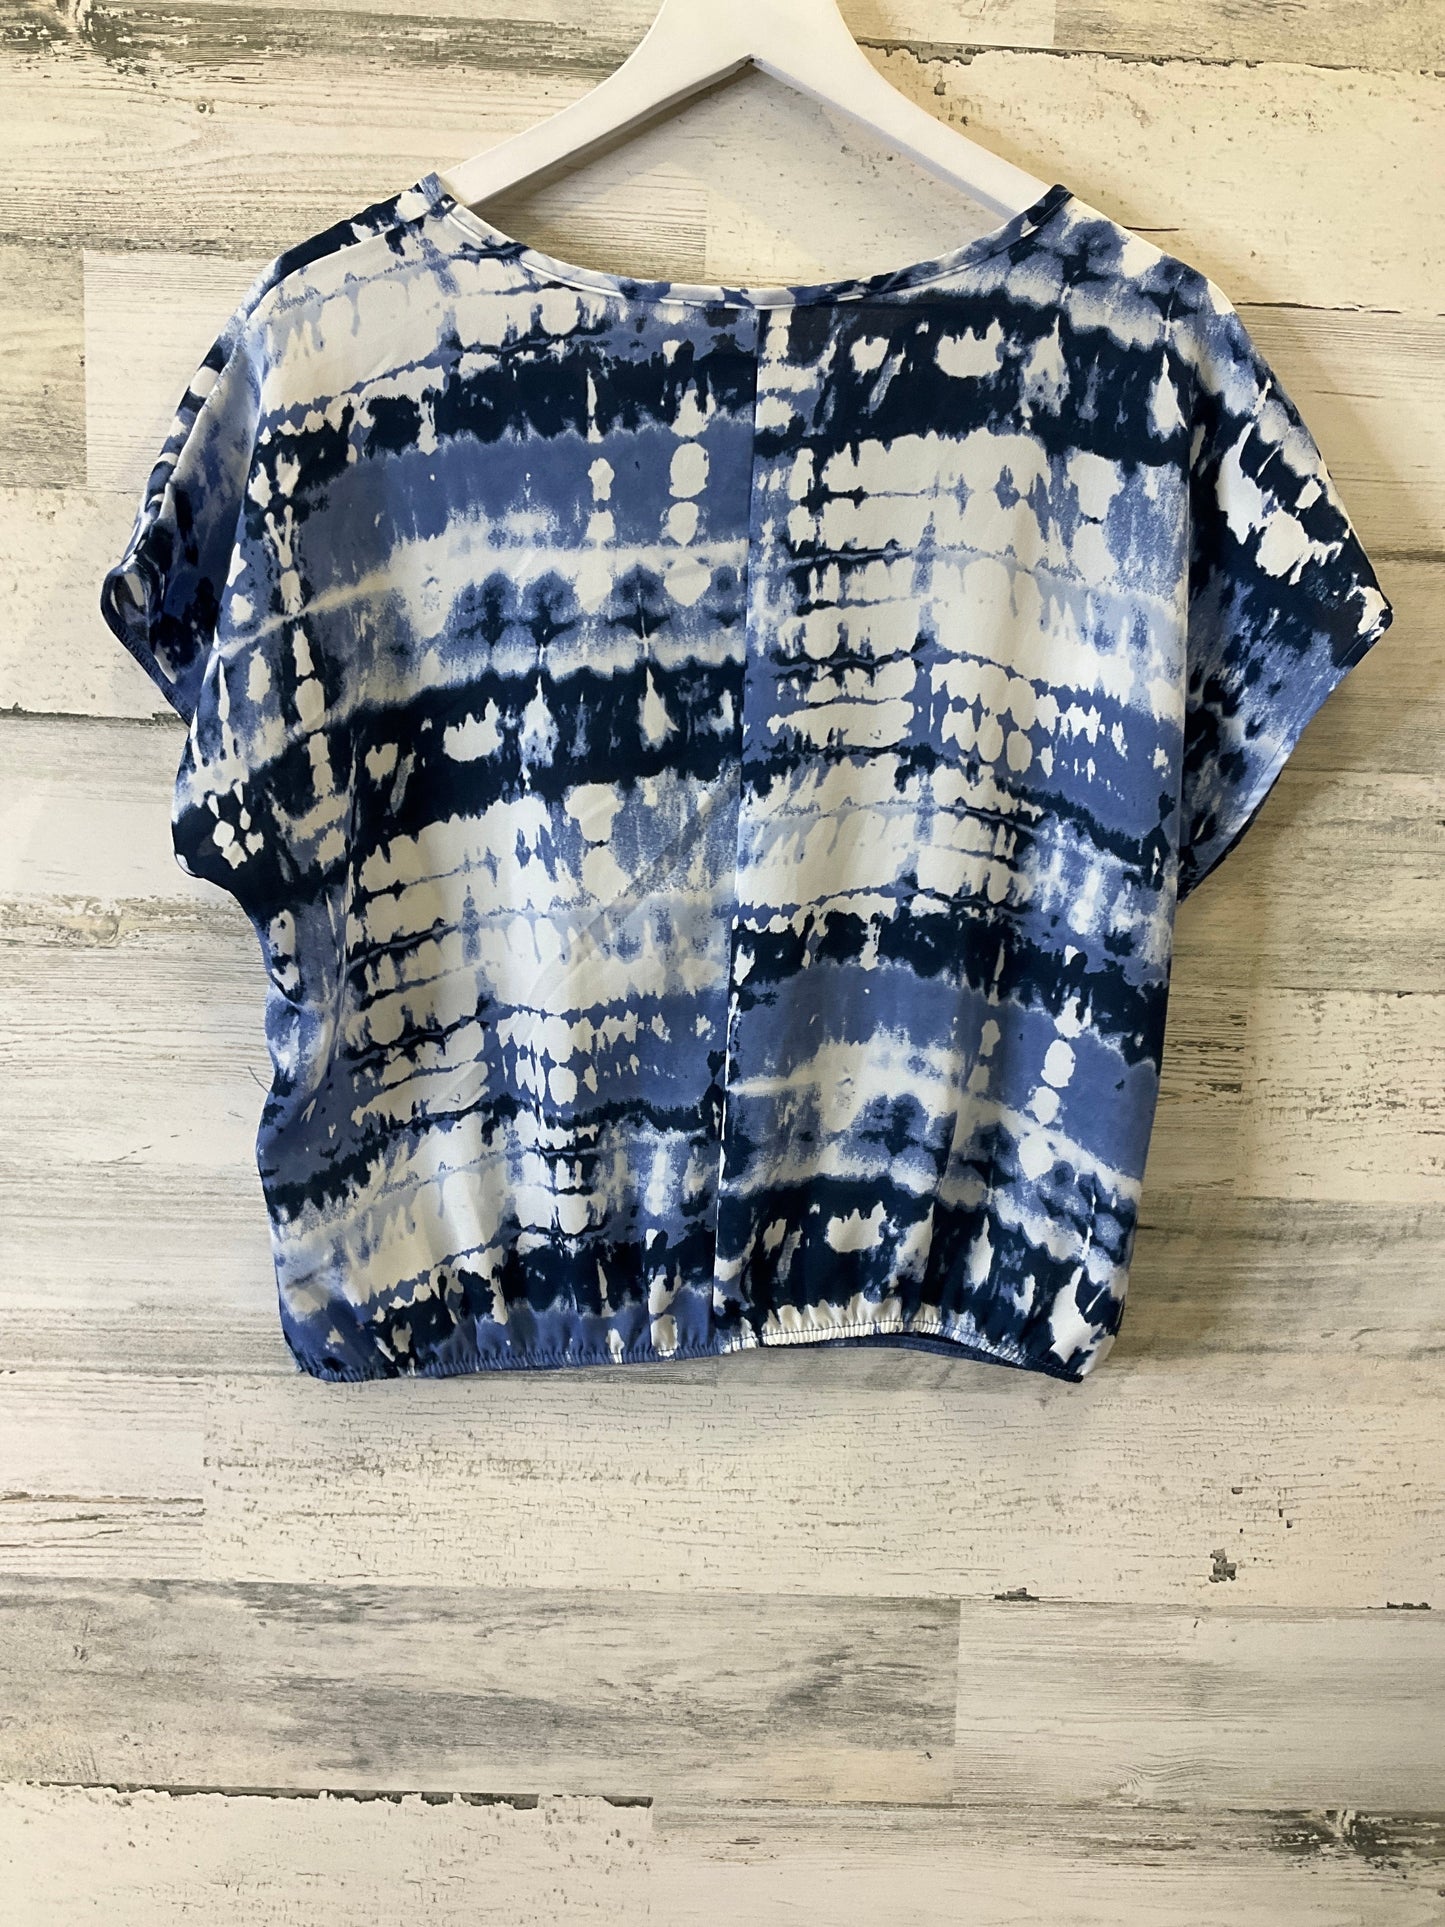 Blue Top Short Sleeve Clothes Mentor, Size L